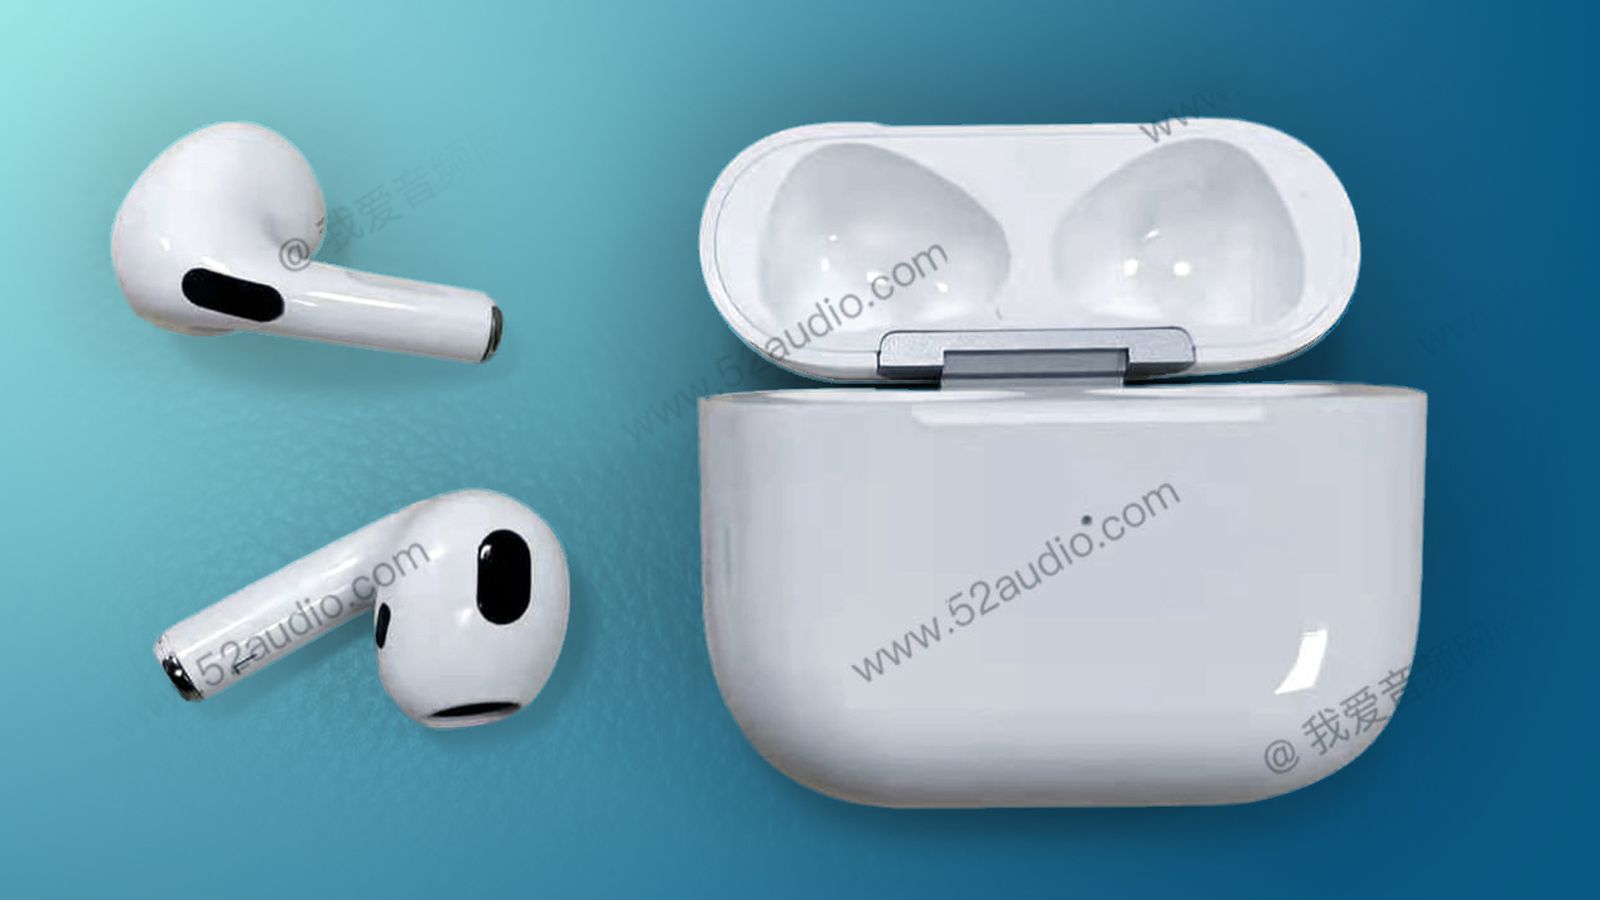 New AirPods are expected to be launched in the third quarter as production begins